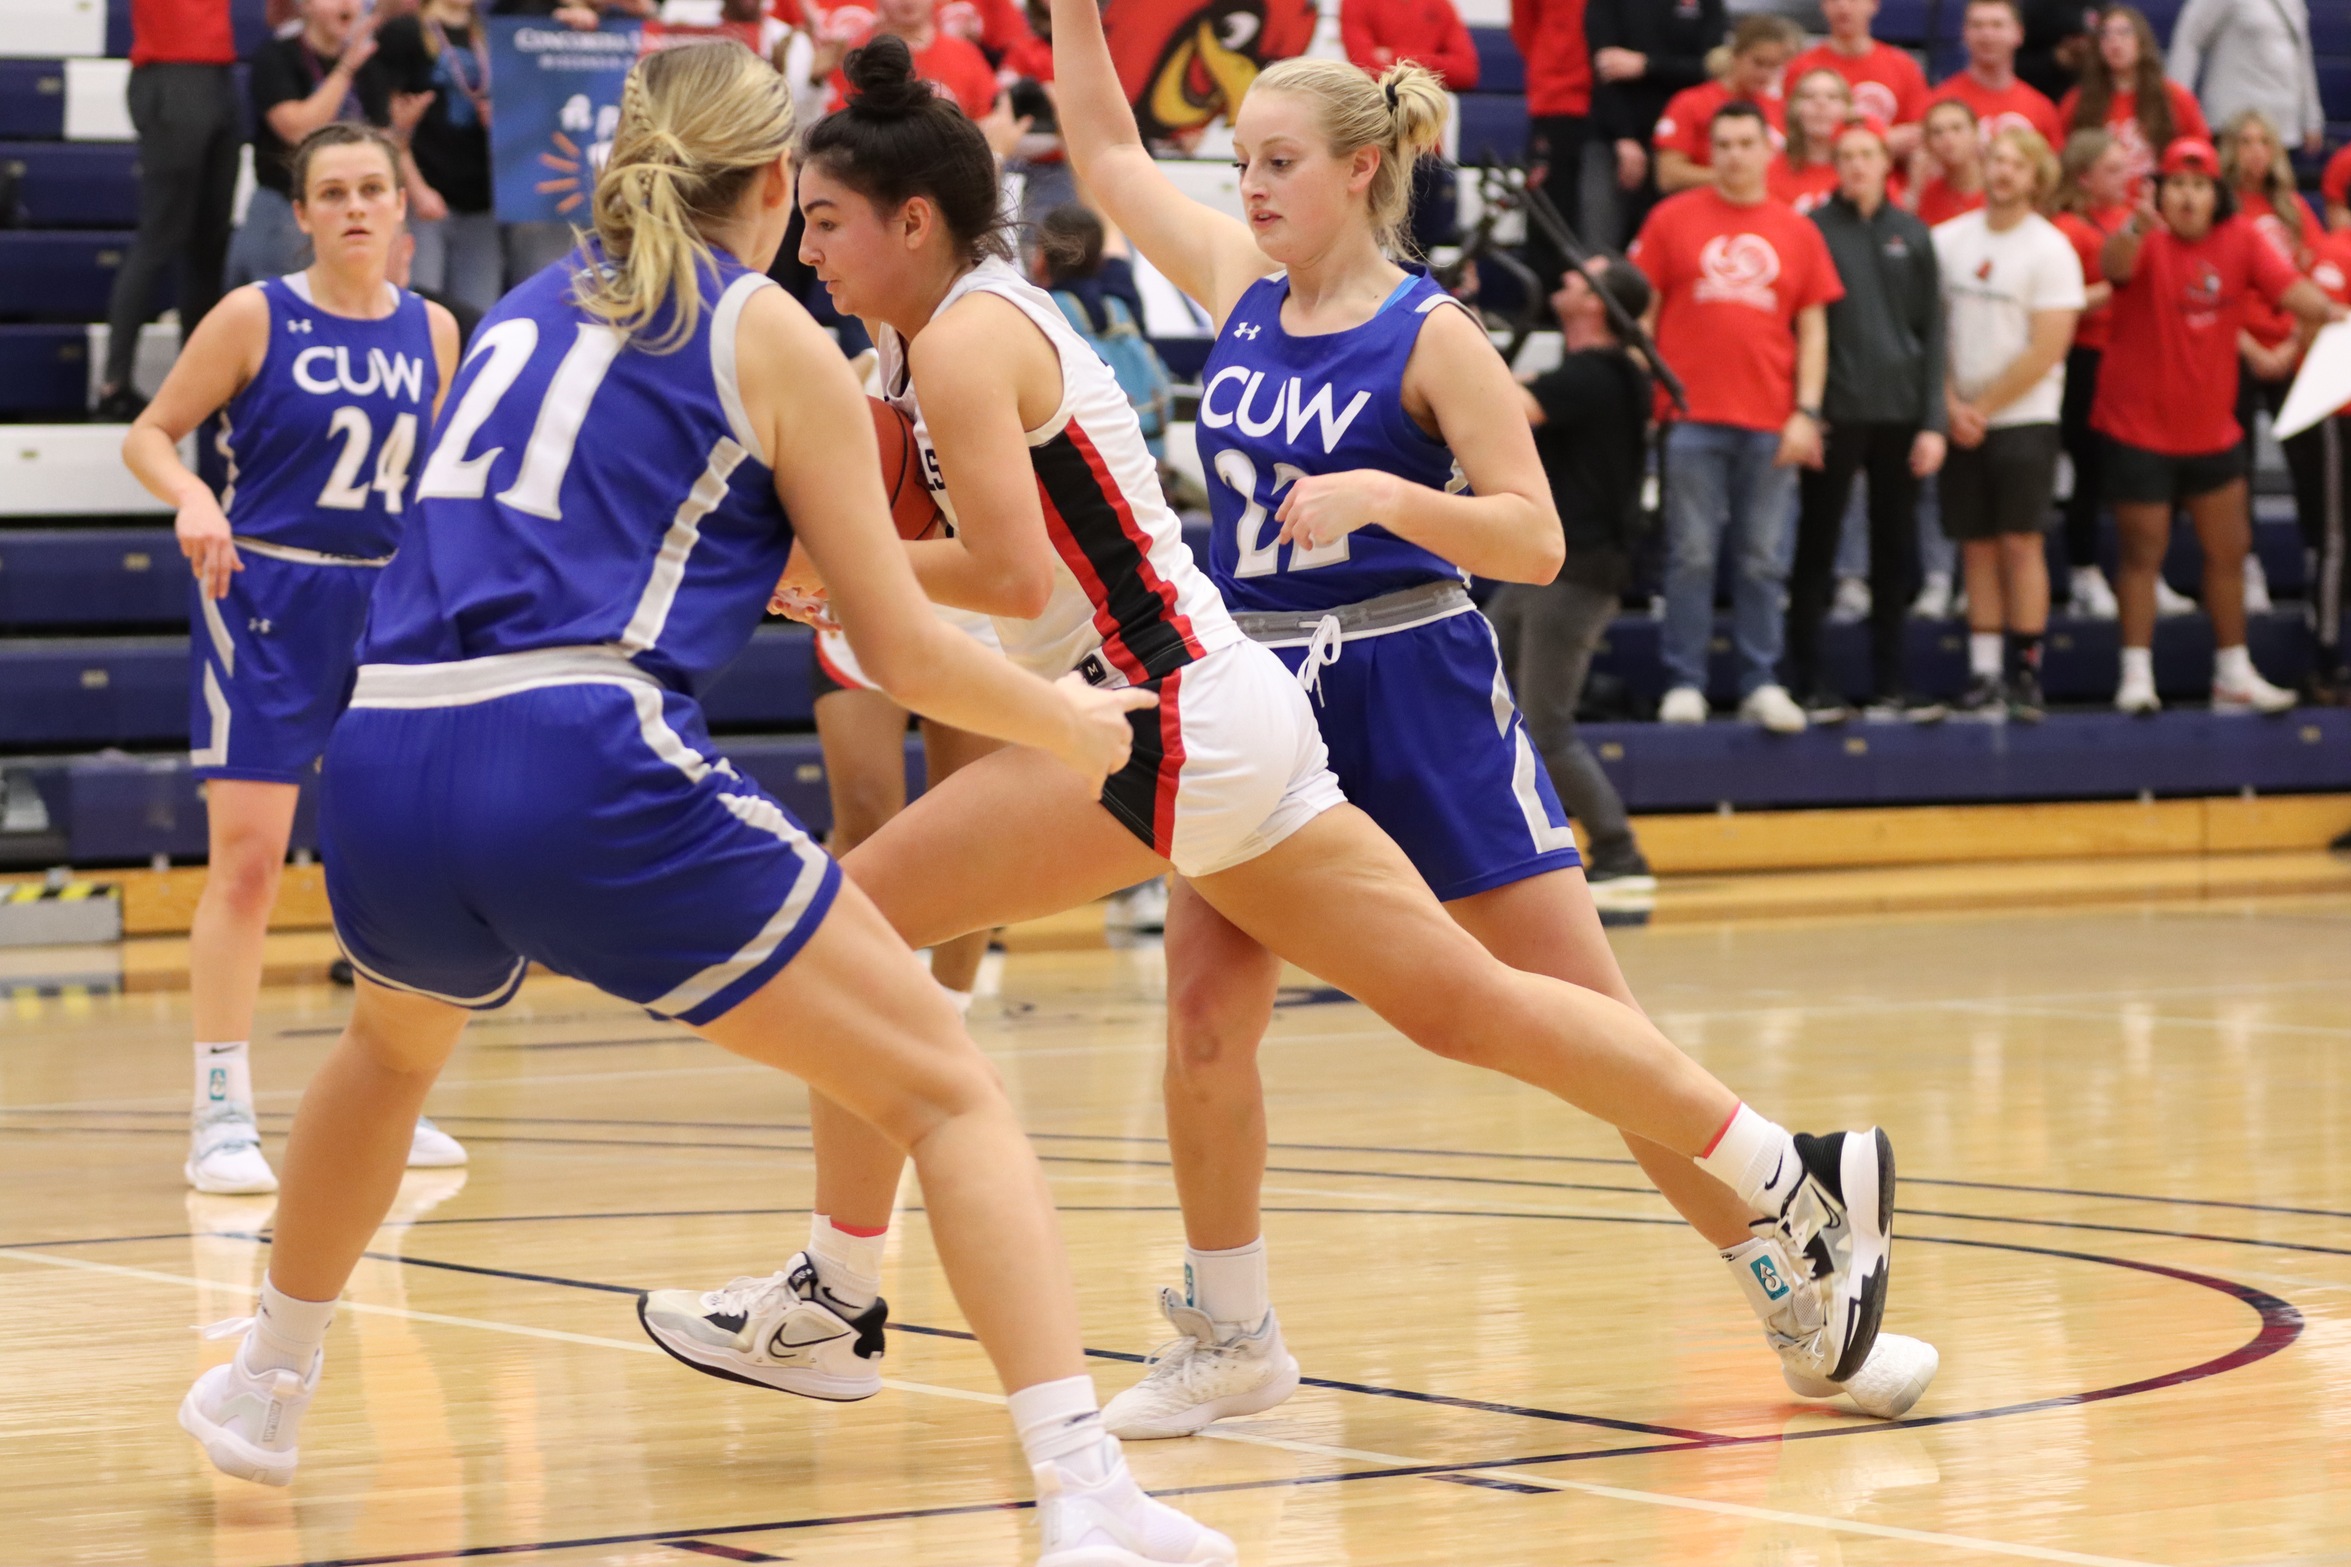 Women's Basketball defeats CUW in CIT consolation game